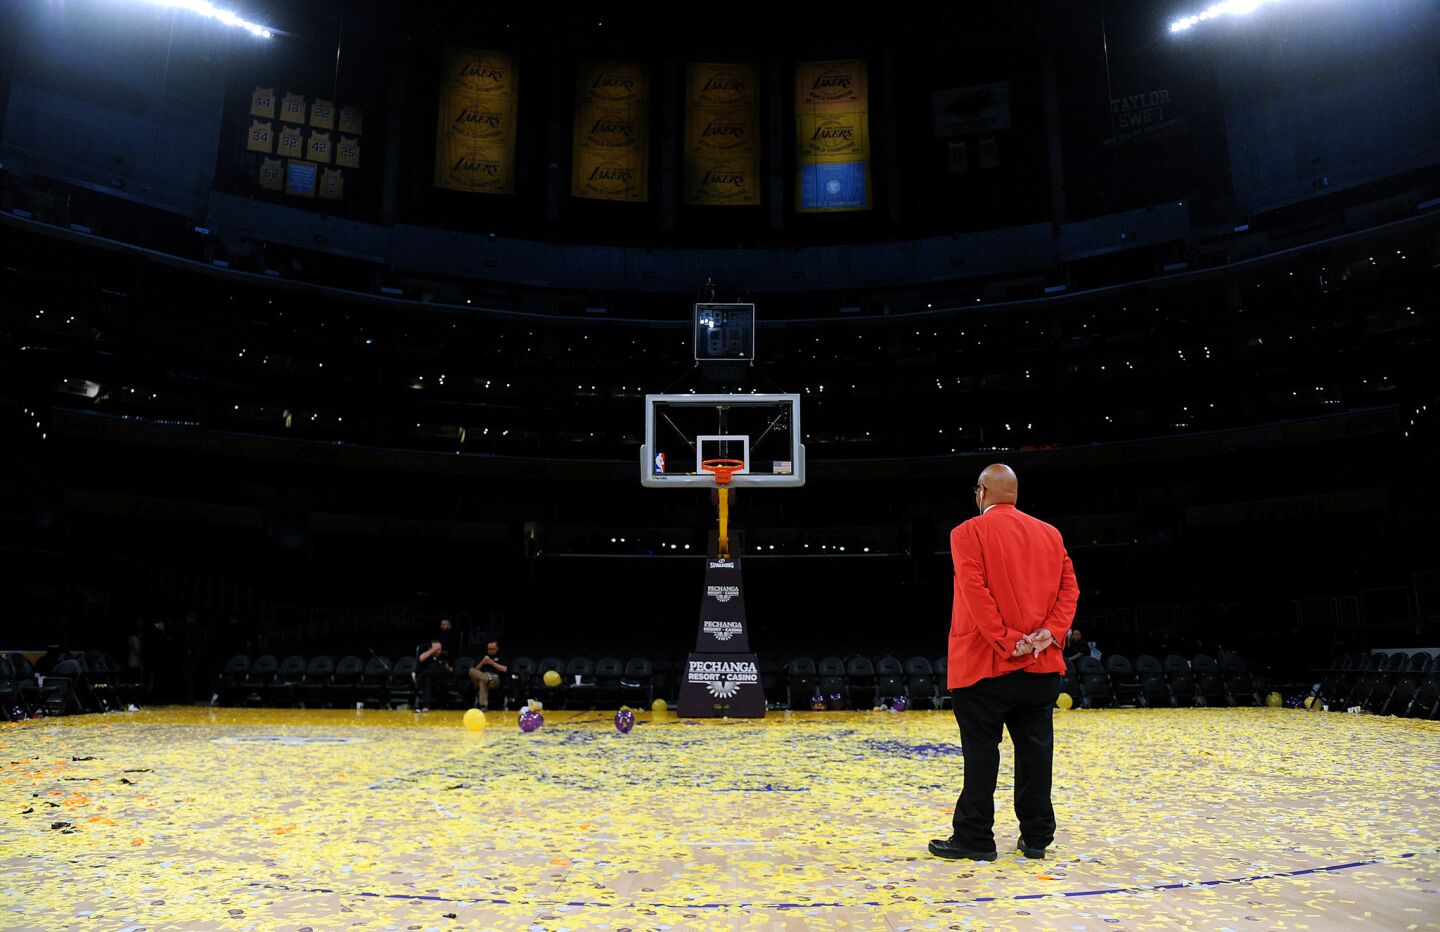 A security guard stnds alone on the court after Kobe Bryant's last game at the Staples Center Wednesday.